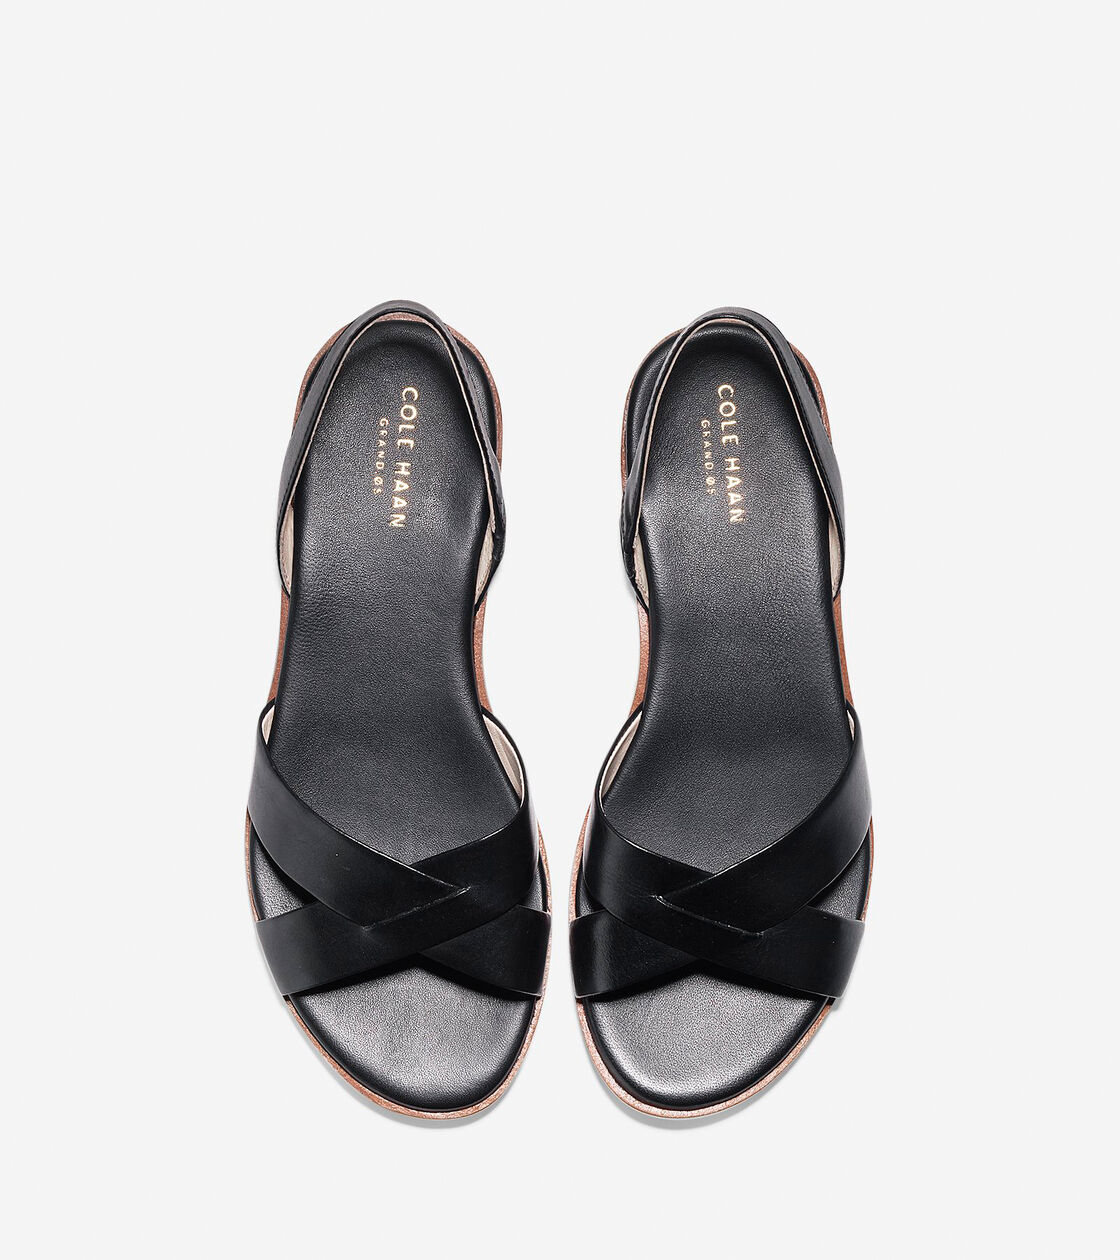 Women's Anica Sling Sandals in Black Leather | Cole Haan